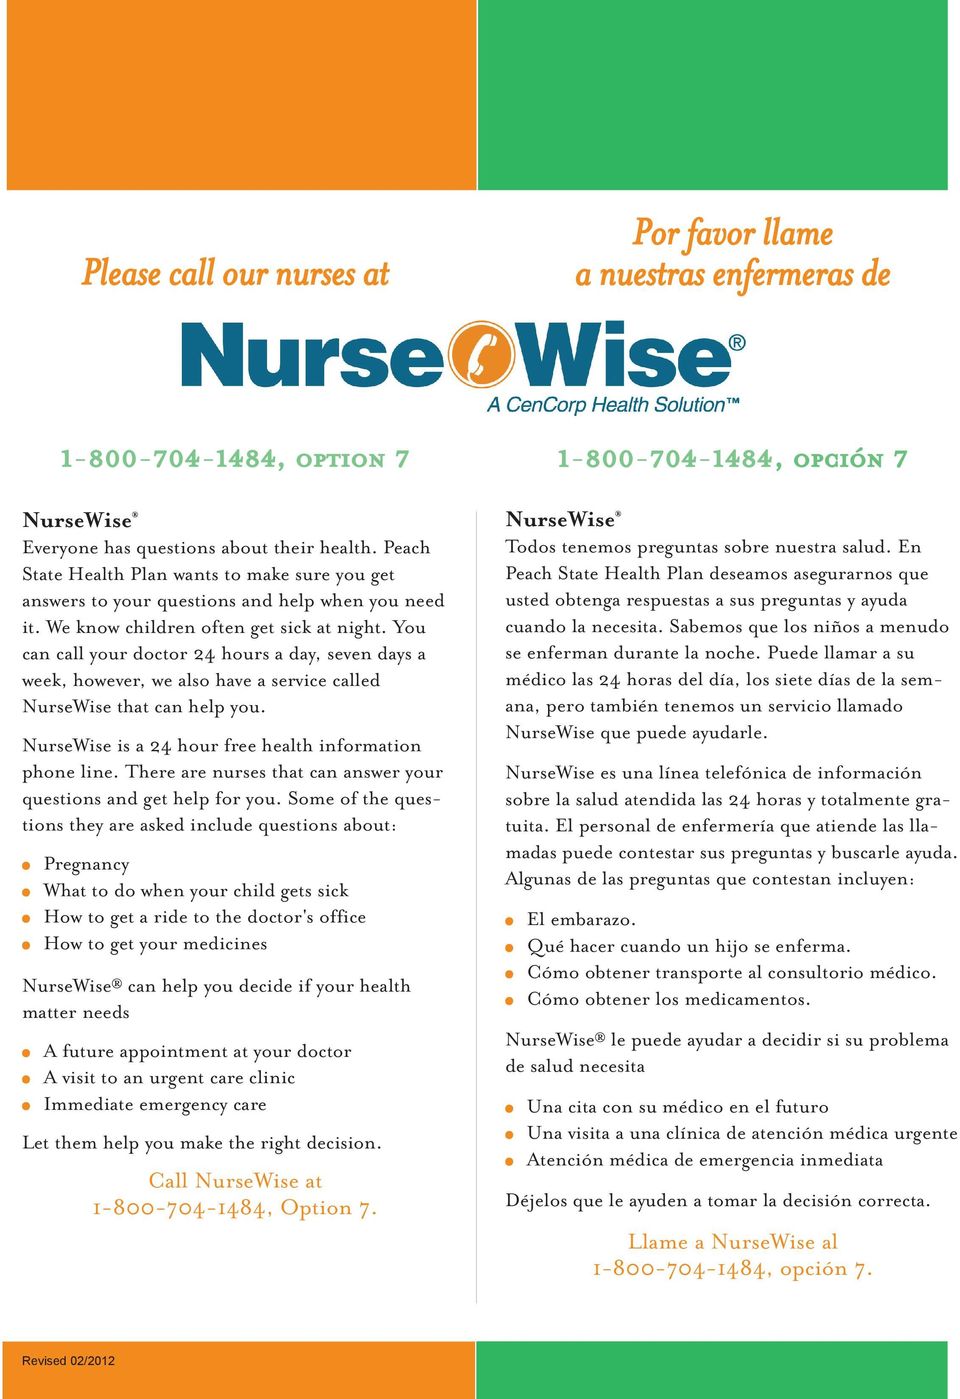 You can call your doctor 24 hours a day, seven days a week, however, we also have a service called NurseWise that can help you. NurseWise is a 24 hour free health information phone line.